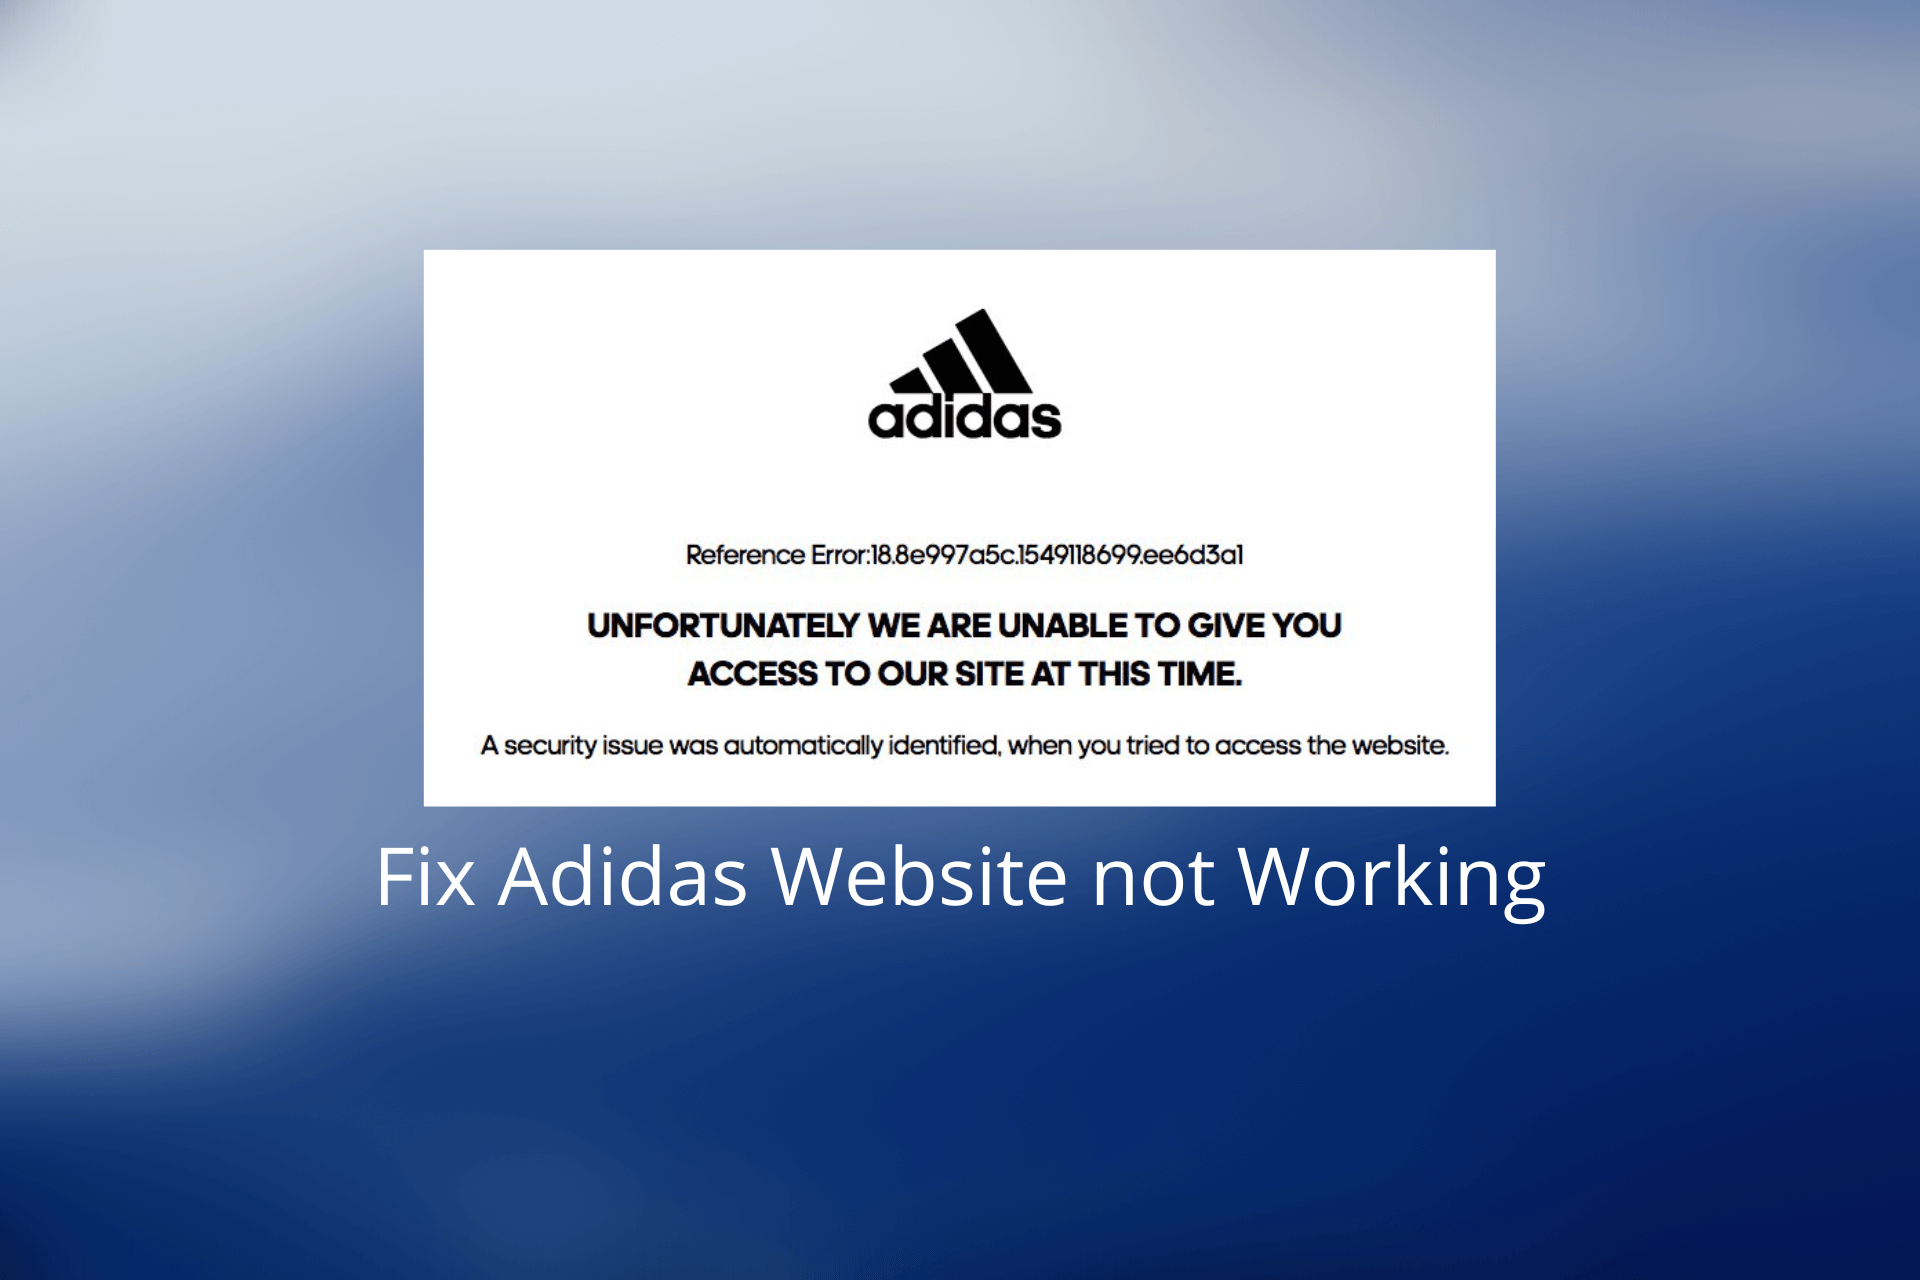 Can't access Adidas website